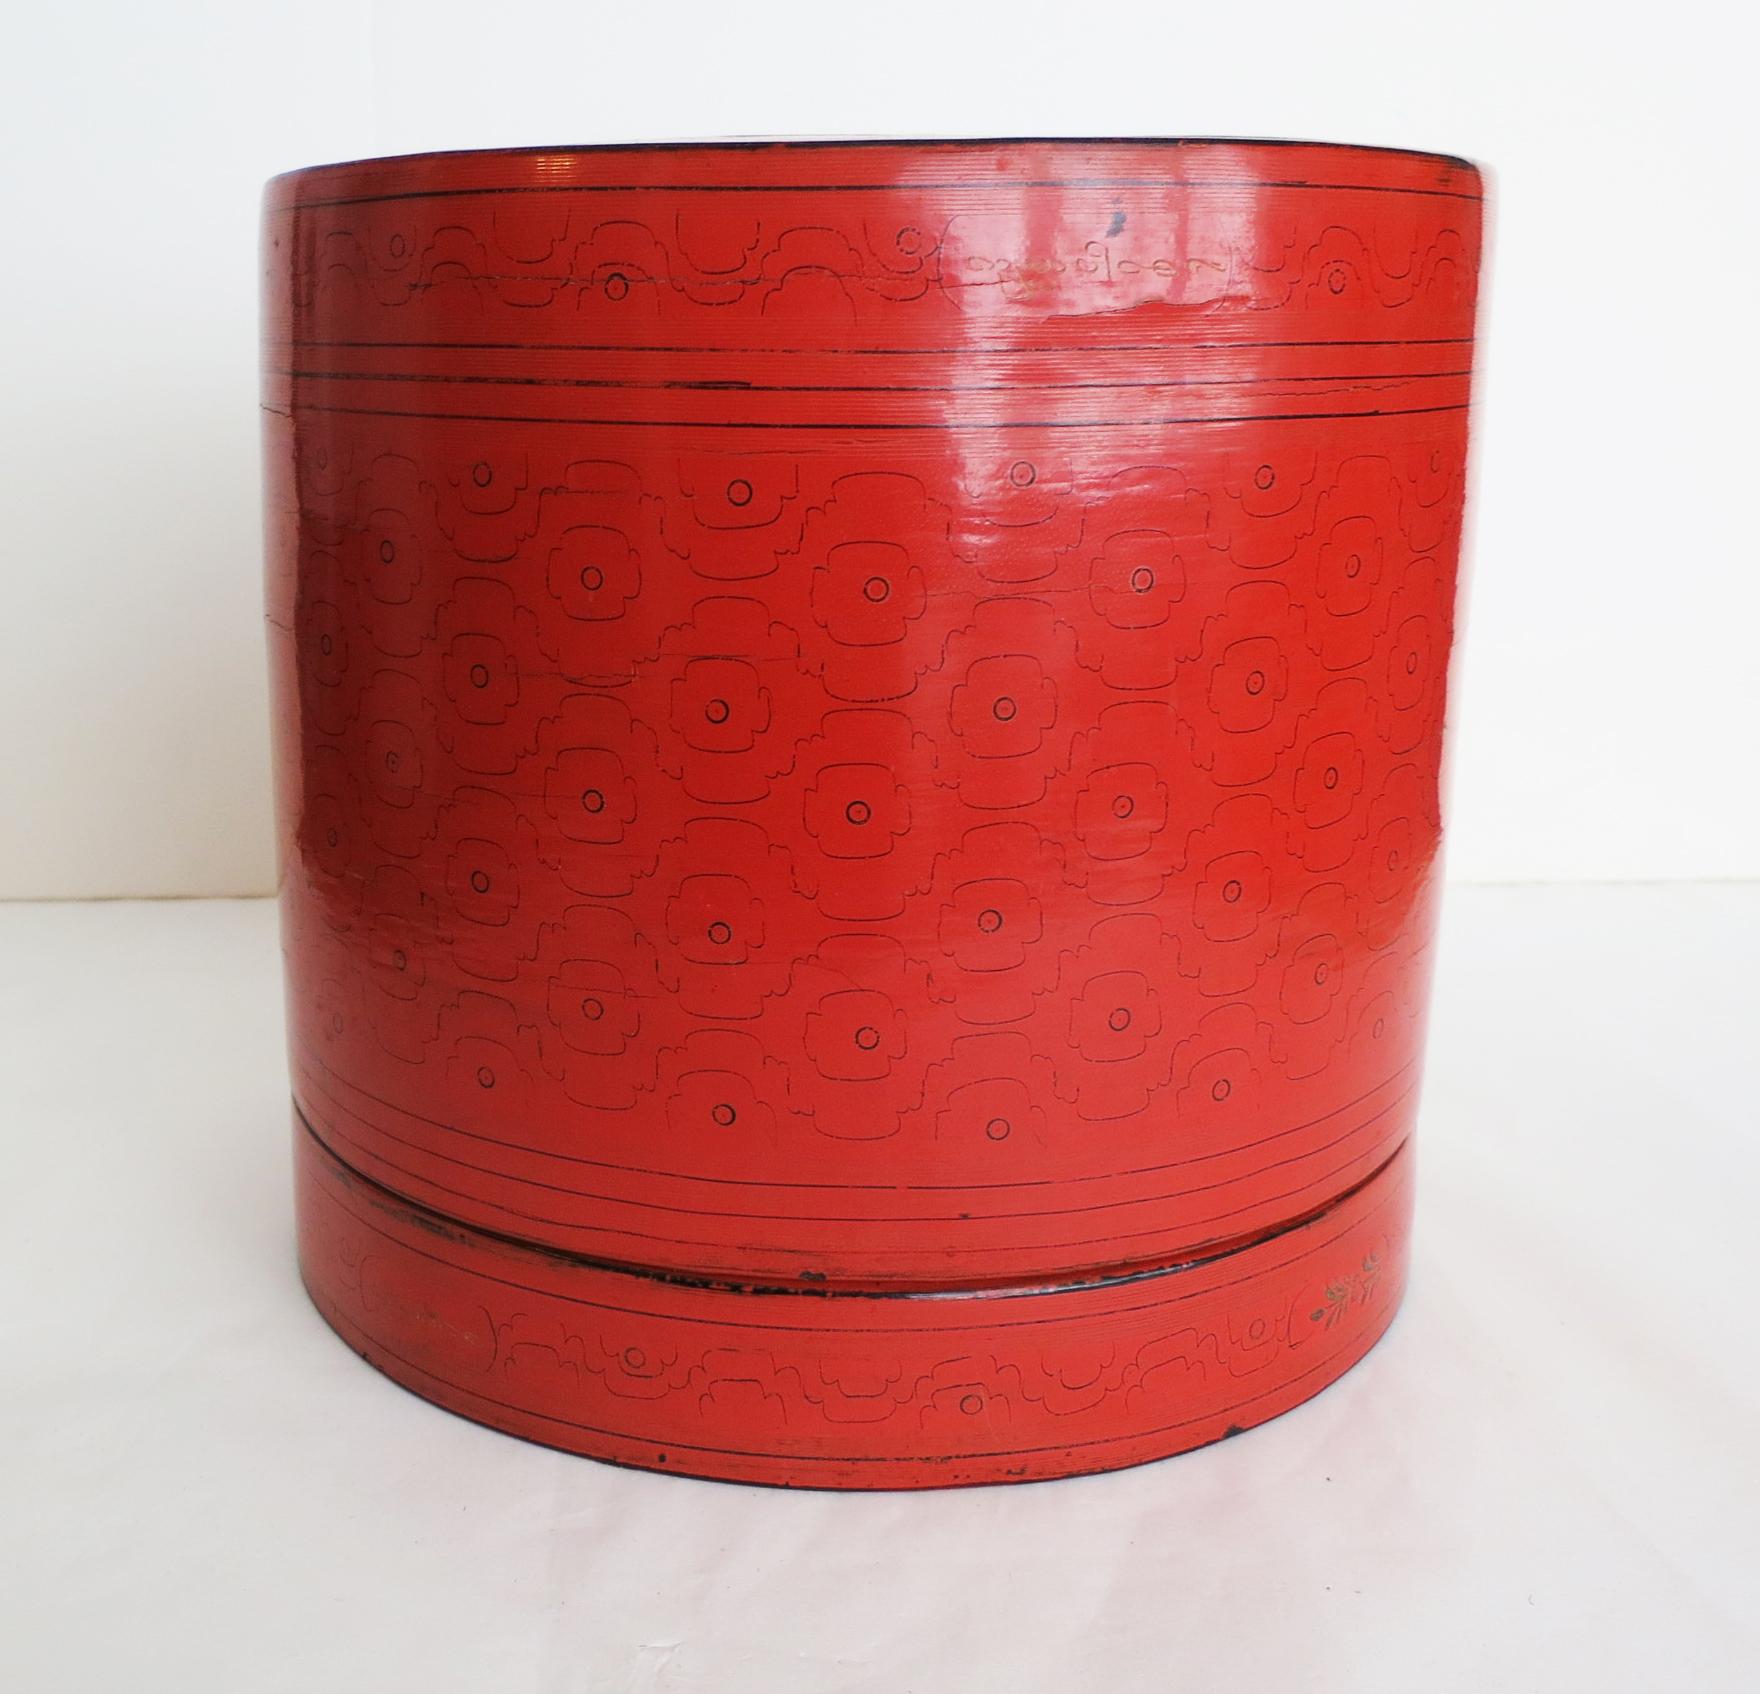 Burmese (Myanmar) Lacquerware has a long tradition dating back to the 13th Century. Lacquer in Burma is called “Thitsi” meaning the sap of a Thitsi Tree (Melanhorrea Usitata). Typically, bamboo and wood are used as a frame or base in making lacquer